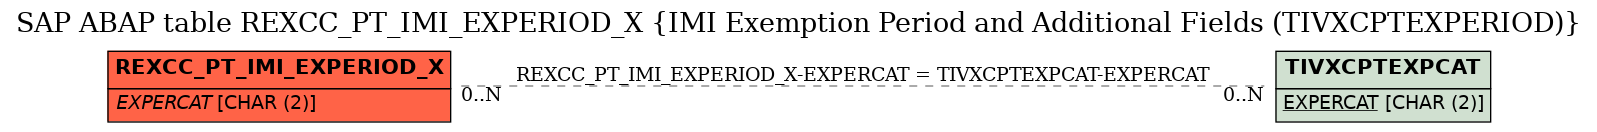 E-R Diagram for table REXCC_PT_IMI_EXPERIOD_X (IMI Exemption Period and Additional Fields (TIVXCPTEXPERIOD))